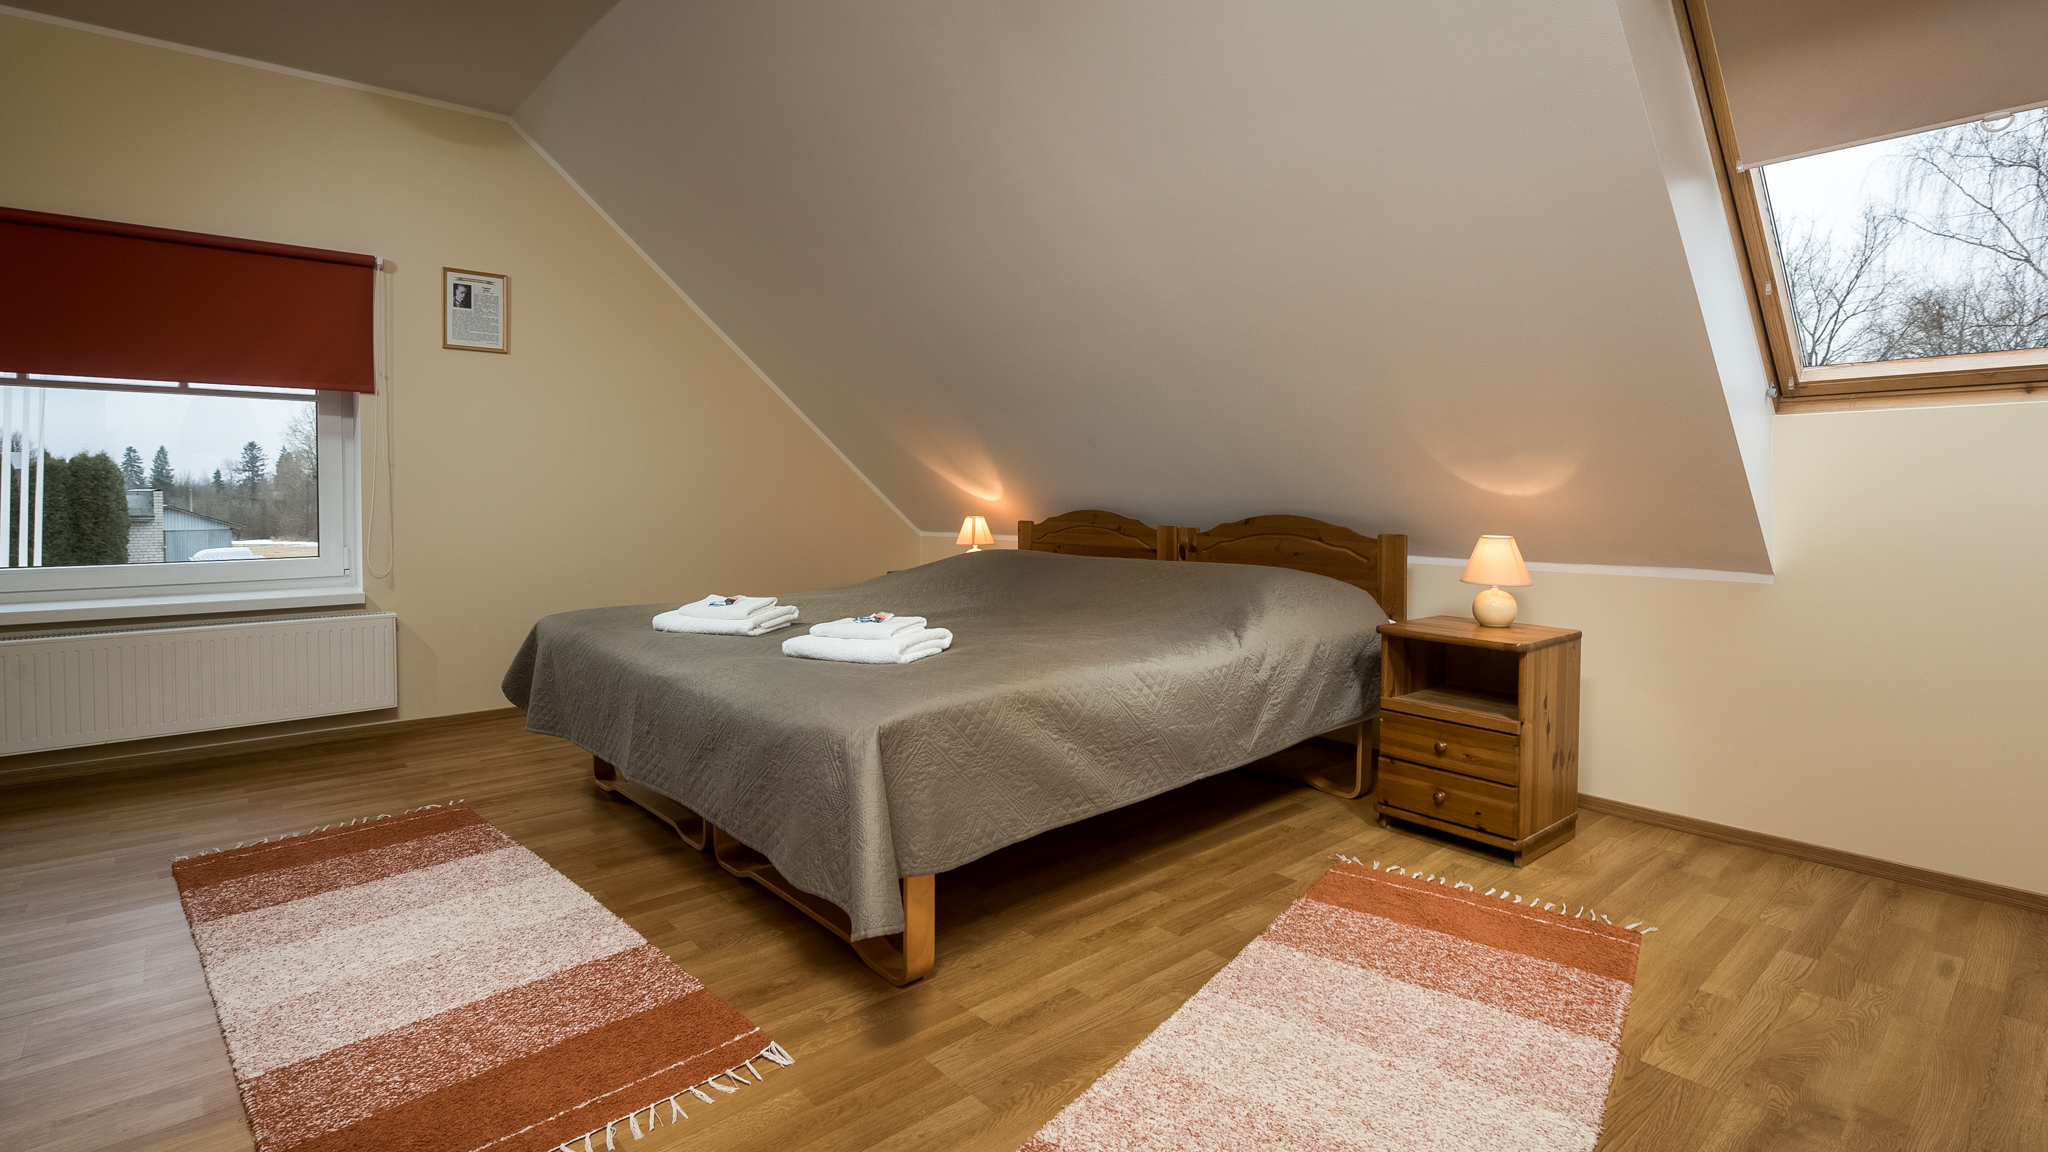 DELUXE DOUBLE ROOM ONE DOUBLE BED (start from 55€/night)